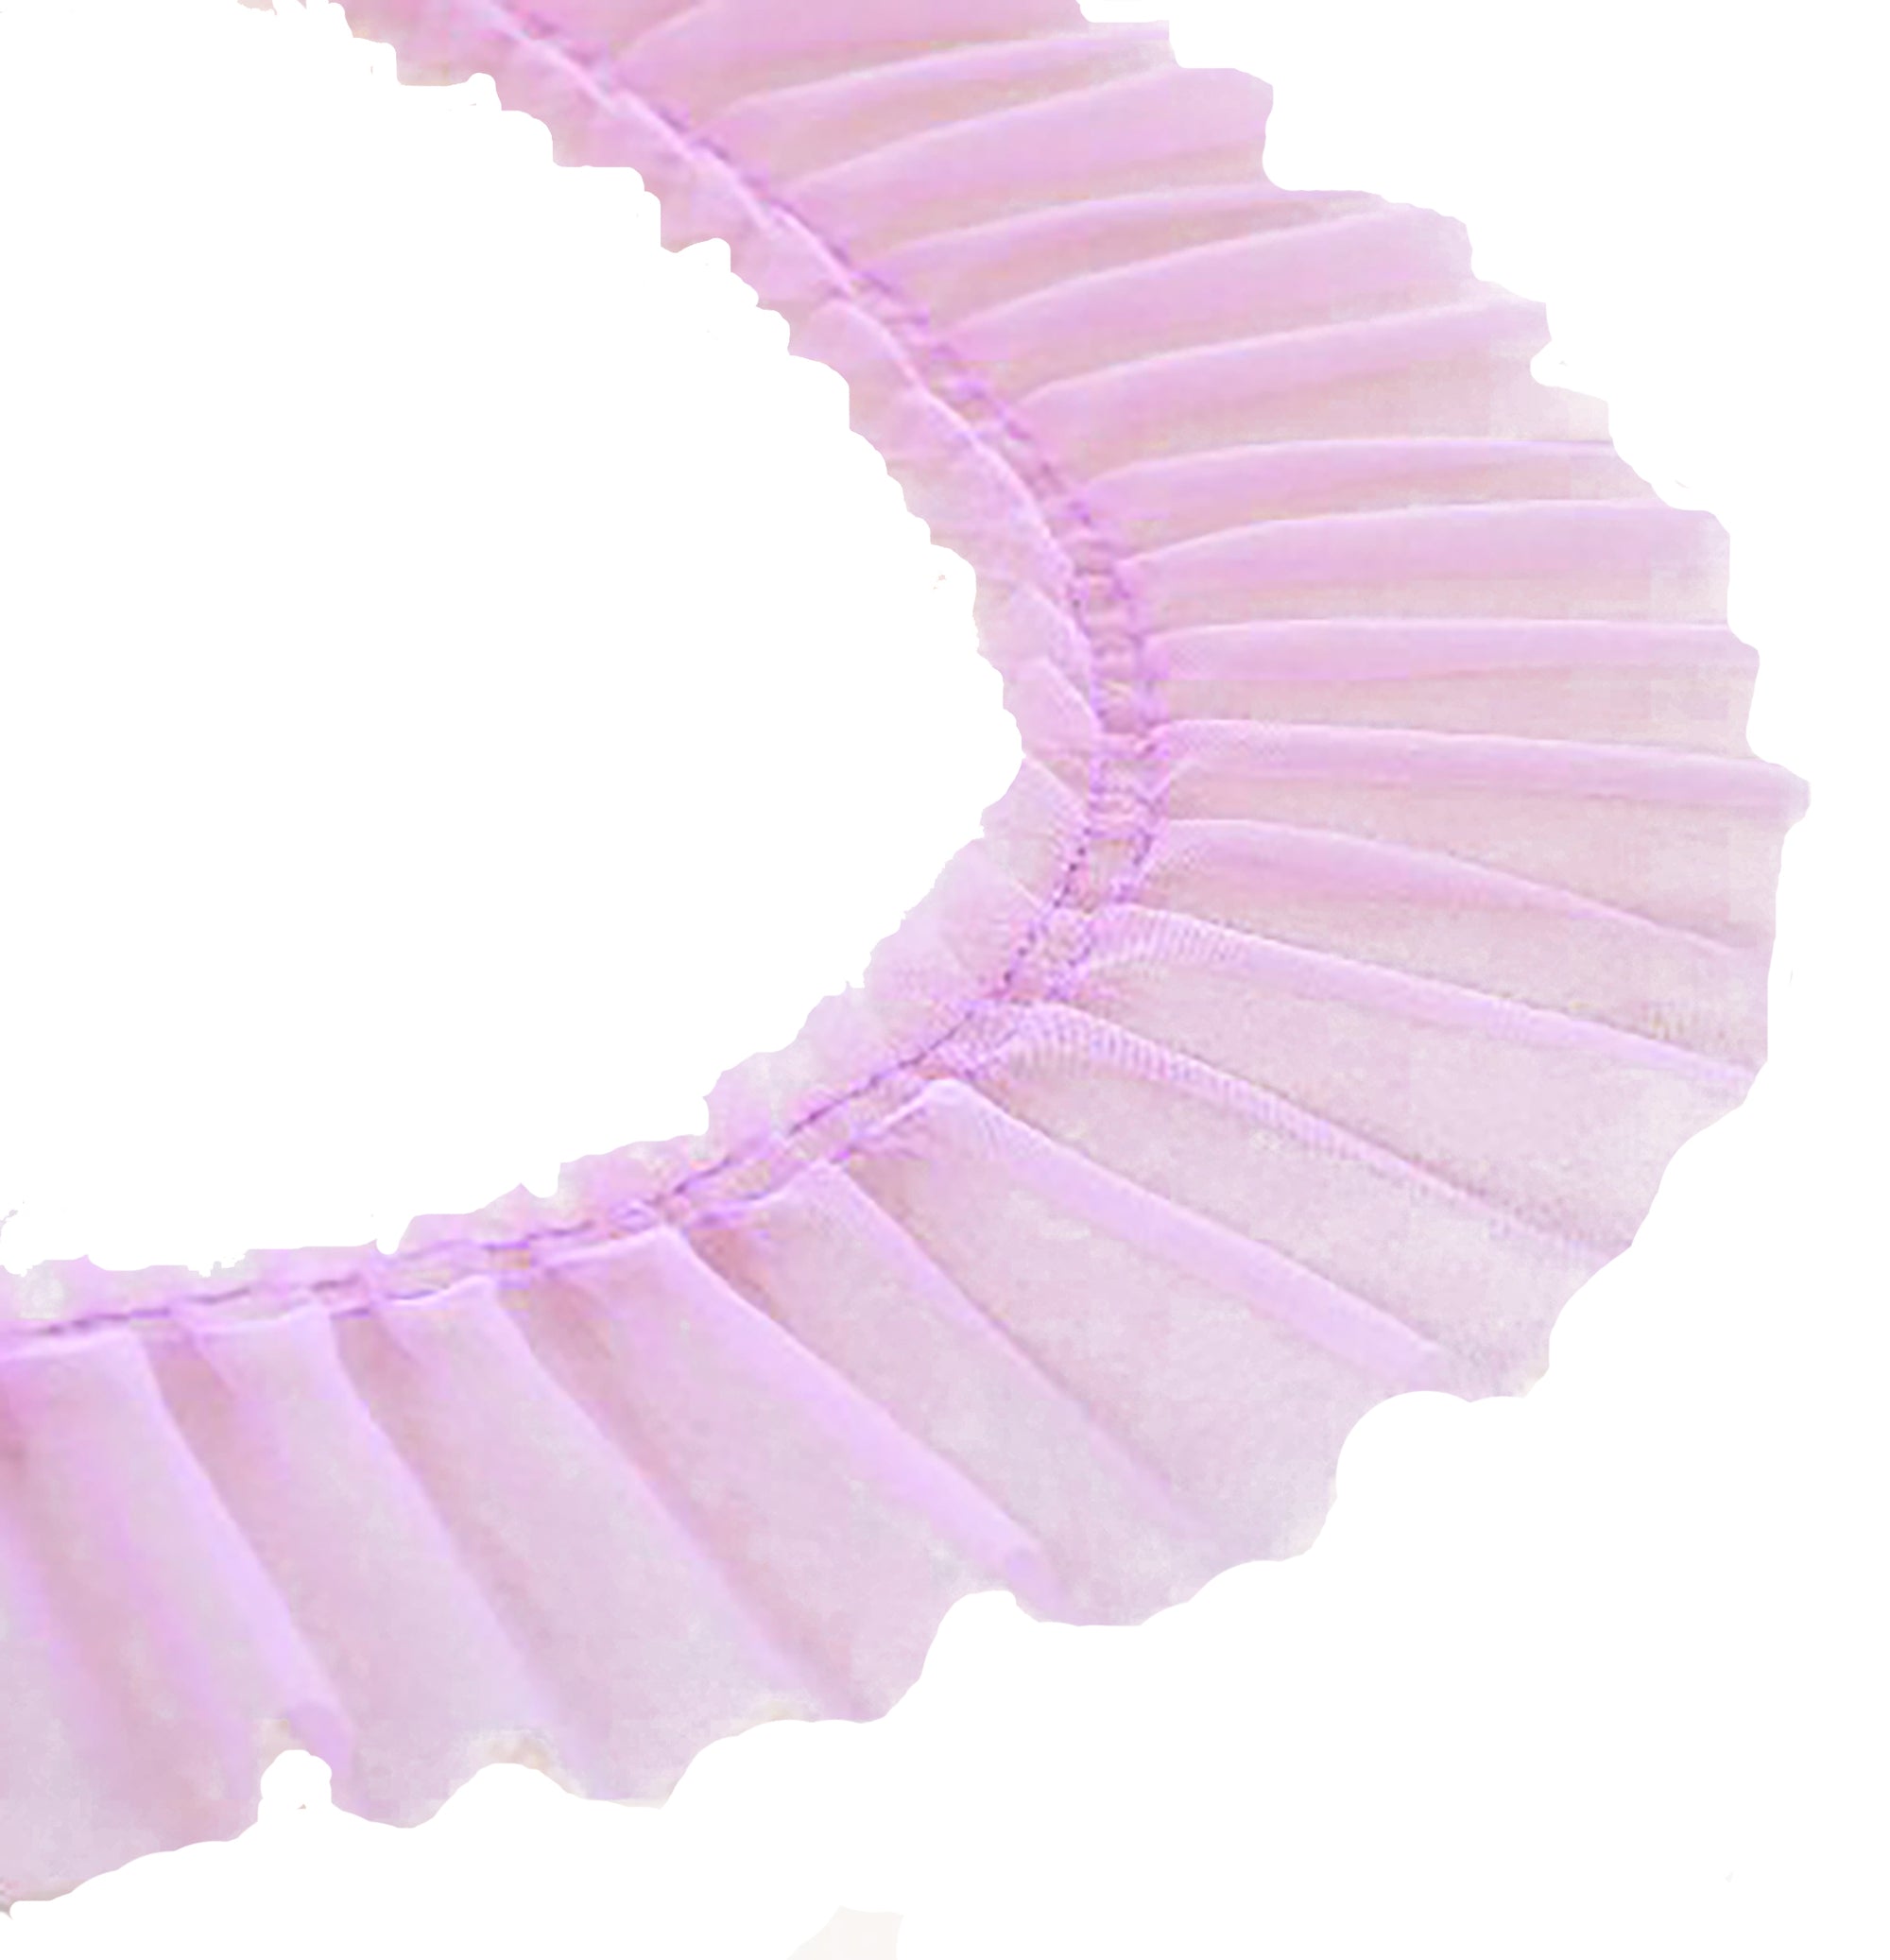 Tulle Pleated Ruffle Trim 10 cm Wide - Sold by the Yard